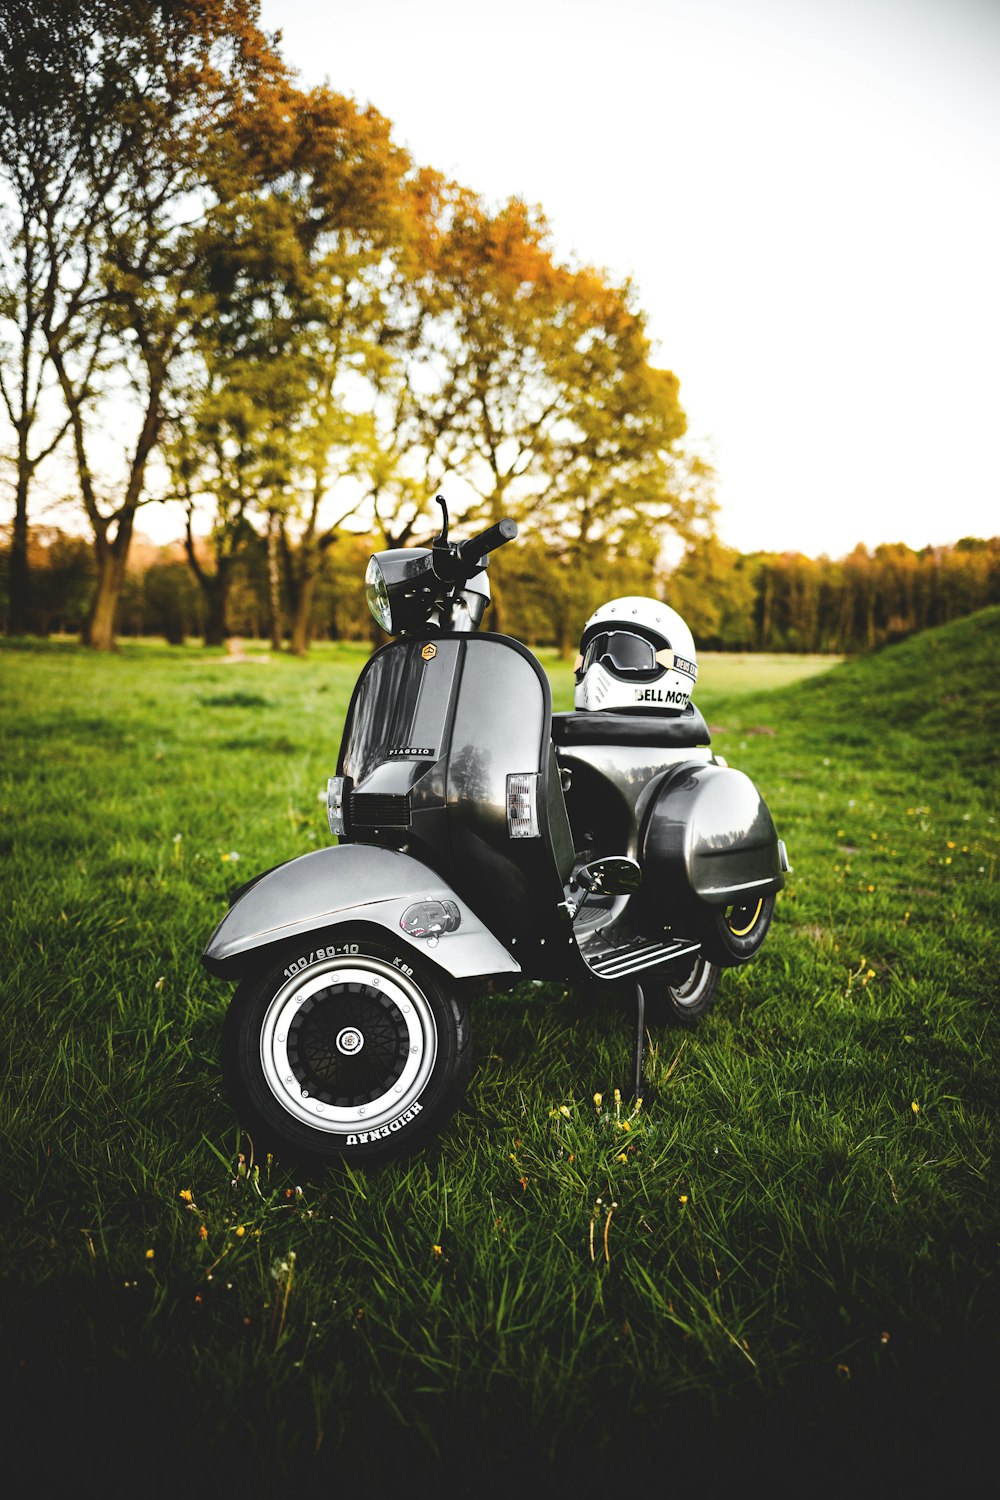 gray and black motor scooter on green grass field during daytime